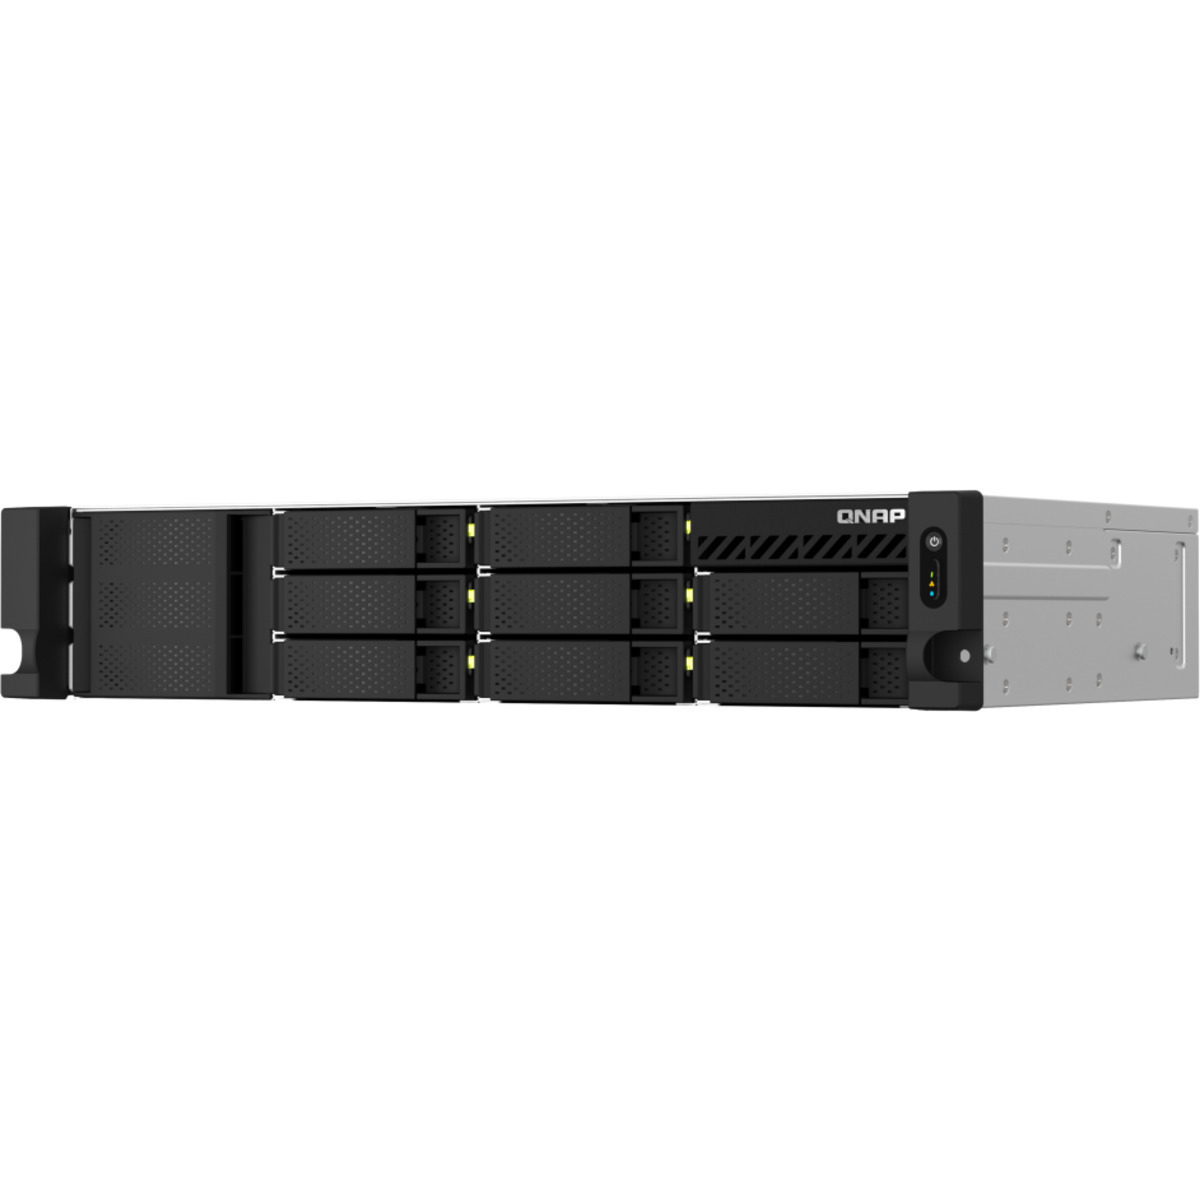 QNAP TS-864eU RackMount 8-Bay Multimedia / Power User / Business NAS - Network Attached Storage Device Burn-In Tested Configurations TS-864eU